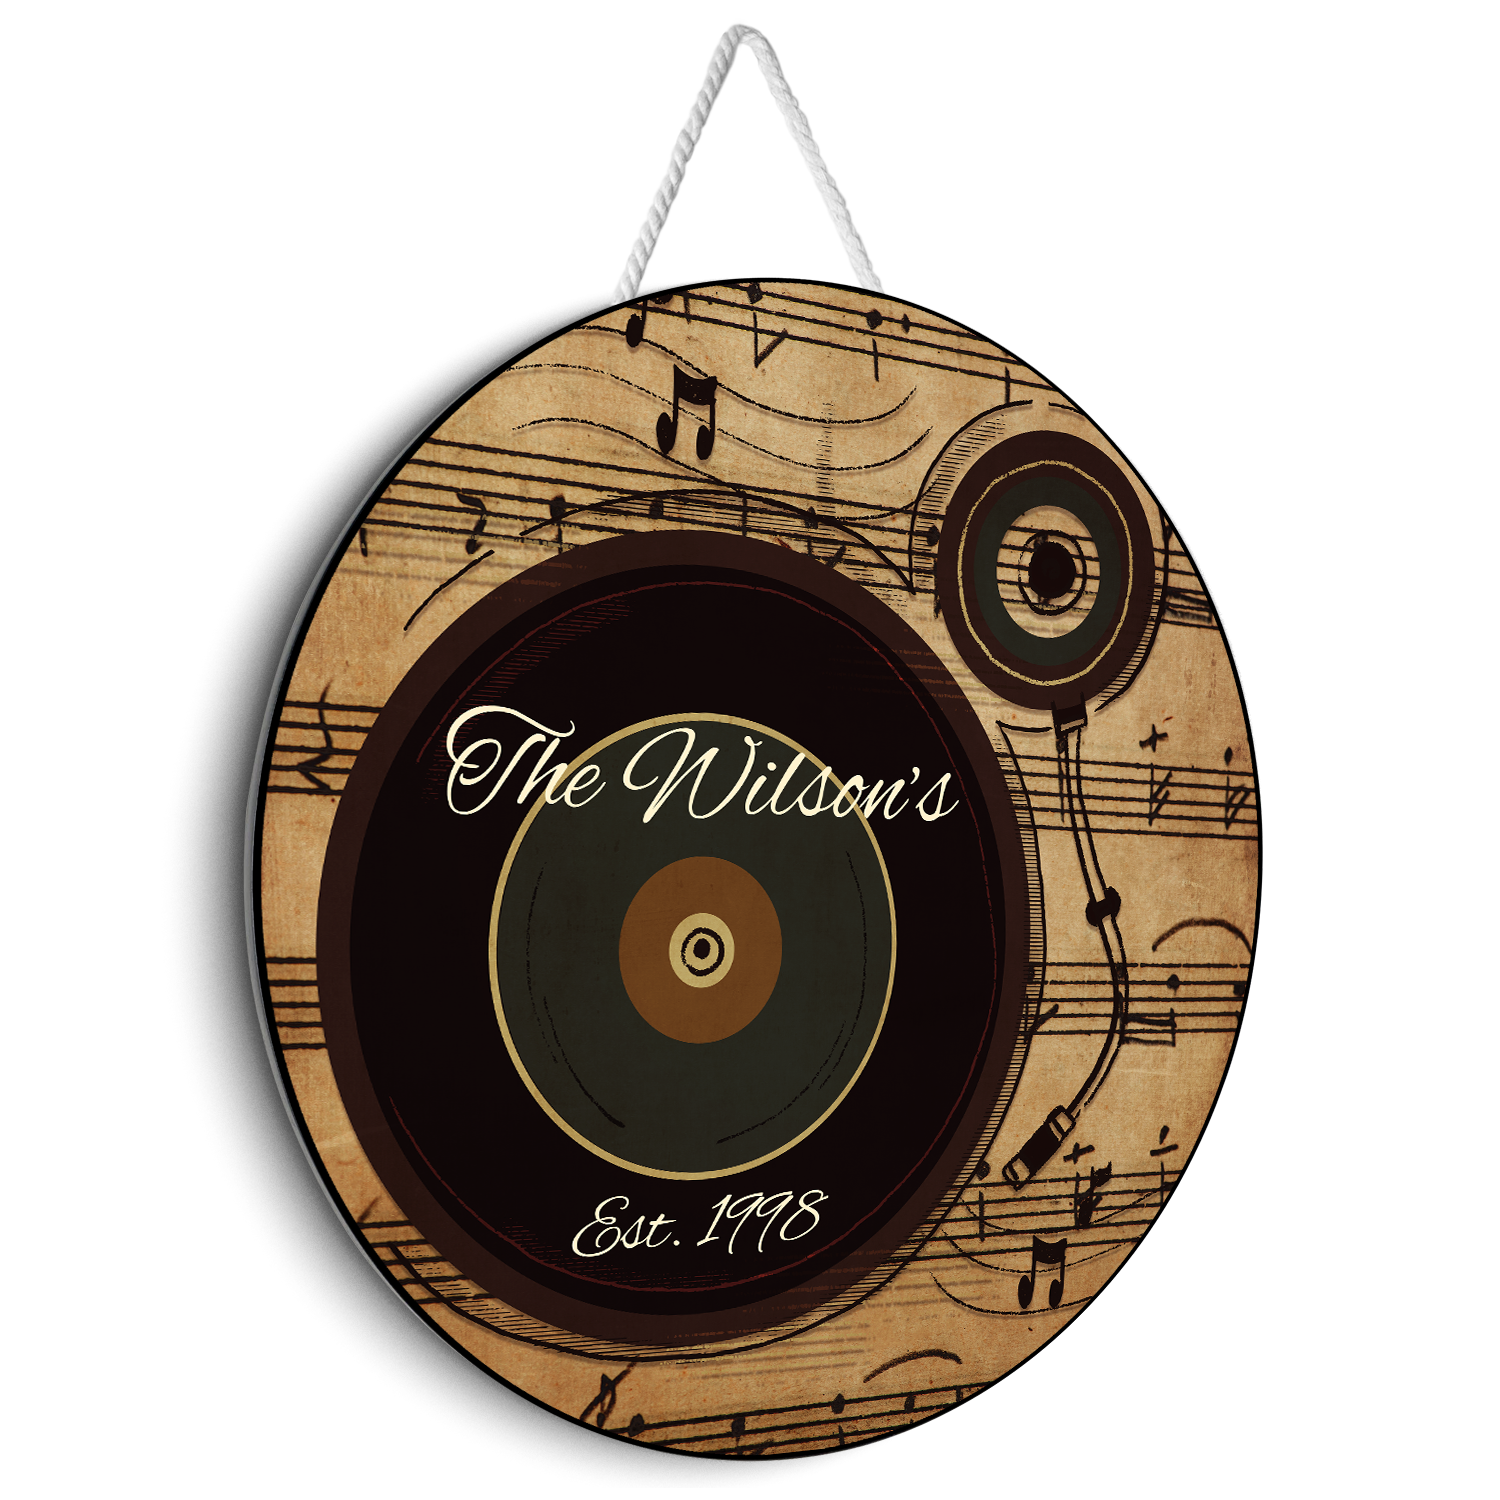 Custom Welcome Sign, Customizable Family Name And Text, Vinyl Record, Round Wood Sign